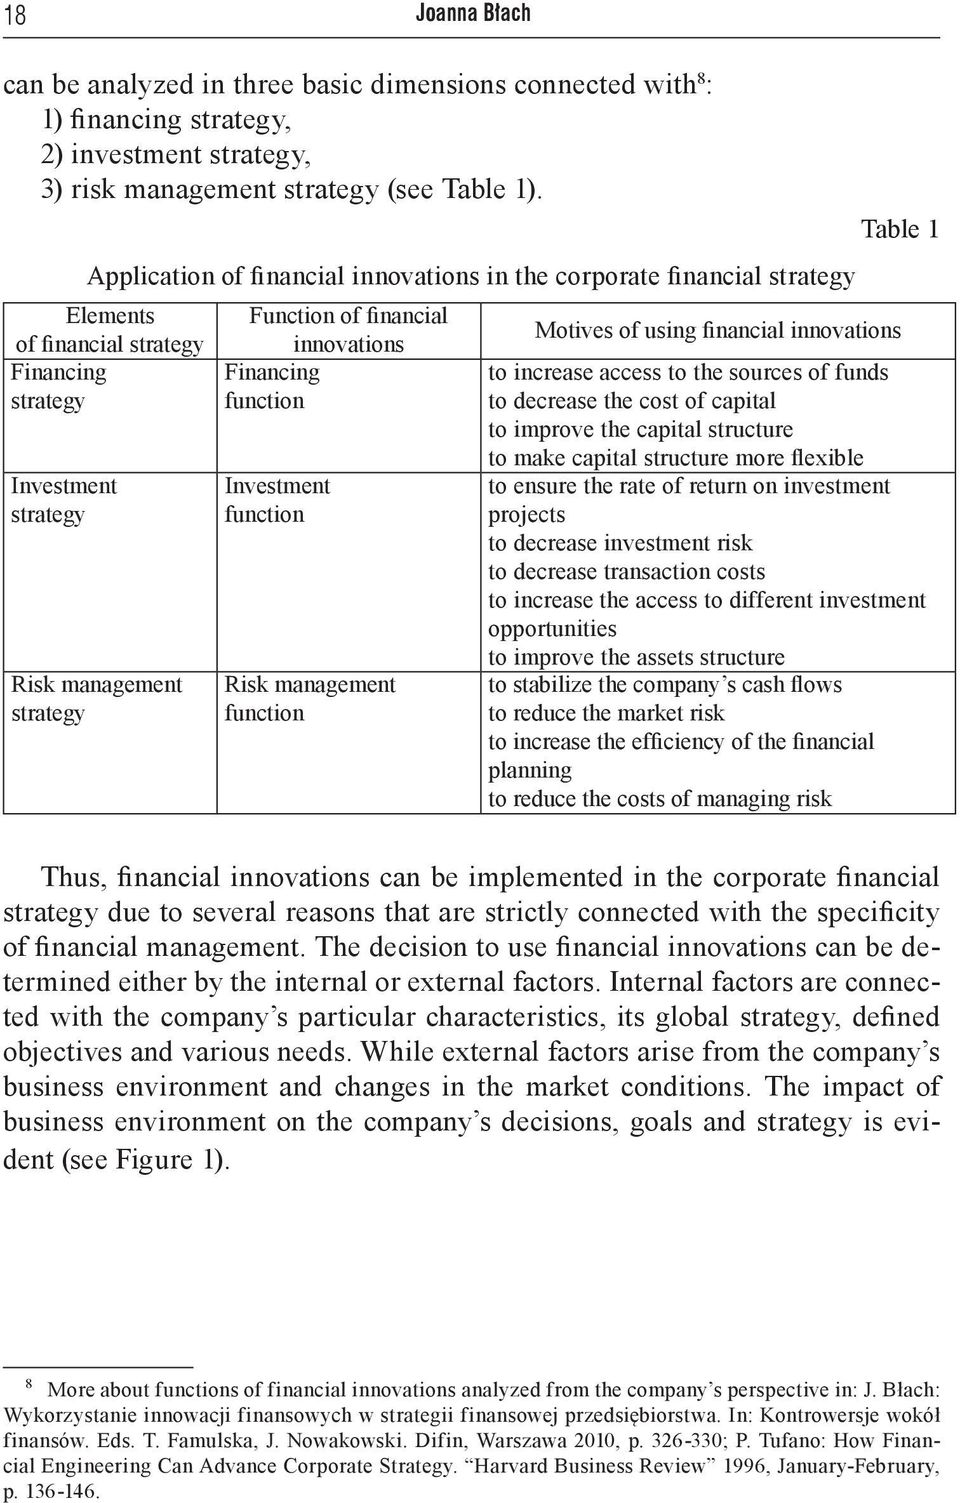 innovations Financing function Investment function Risk management function Table 1 Motives of using financial innovations to increase access to the sources of funds to decrease the cost of capital